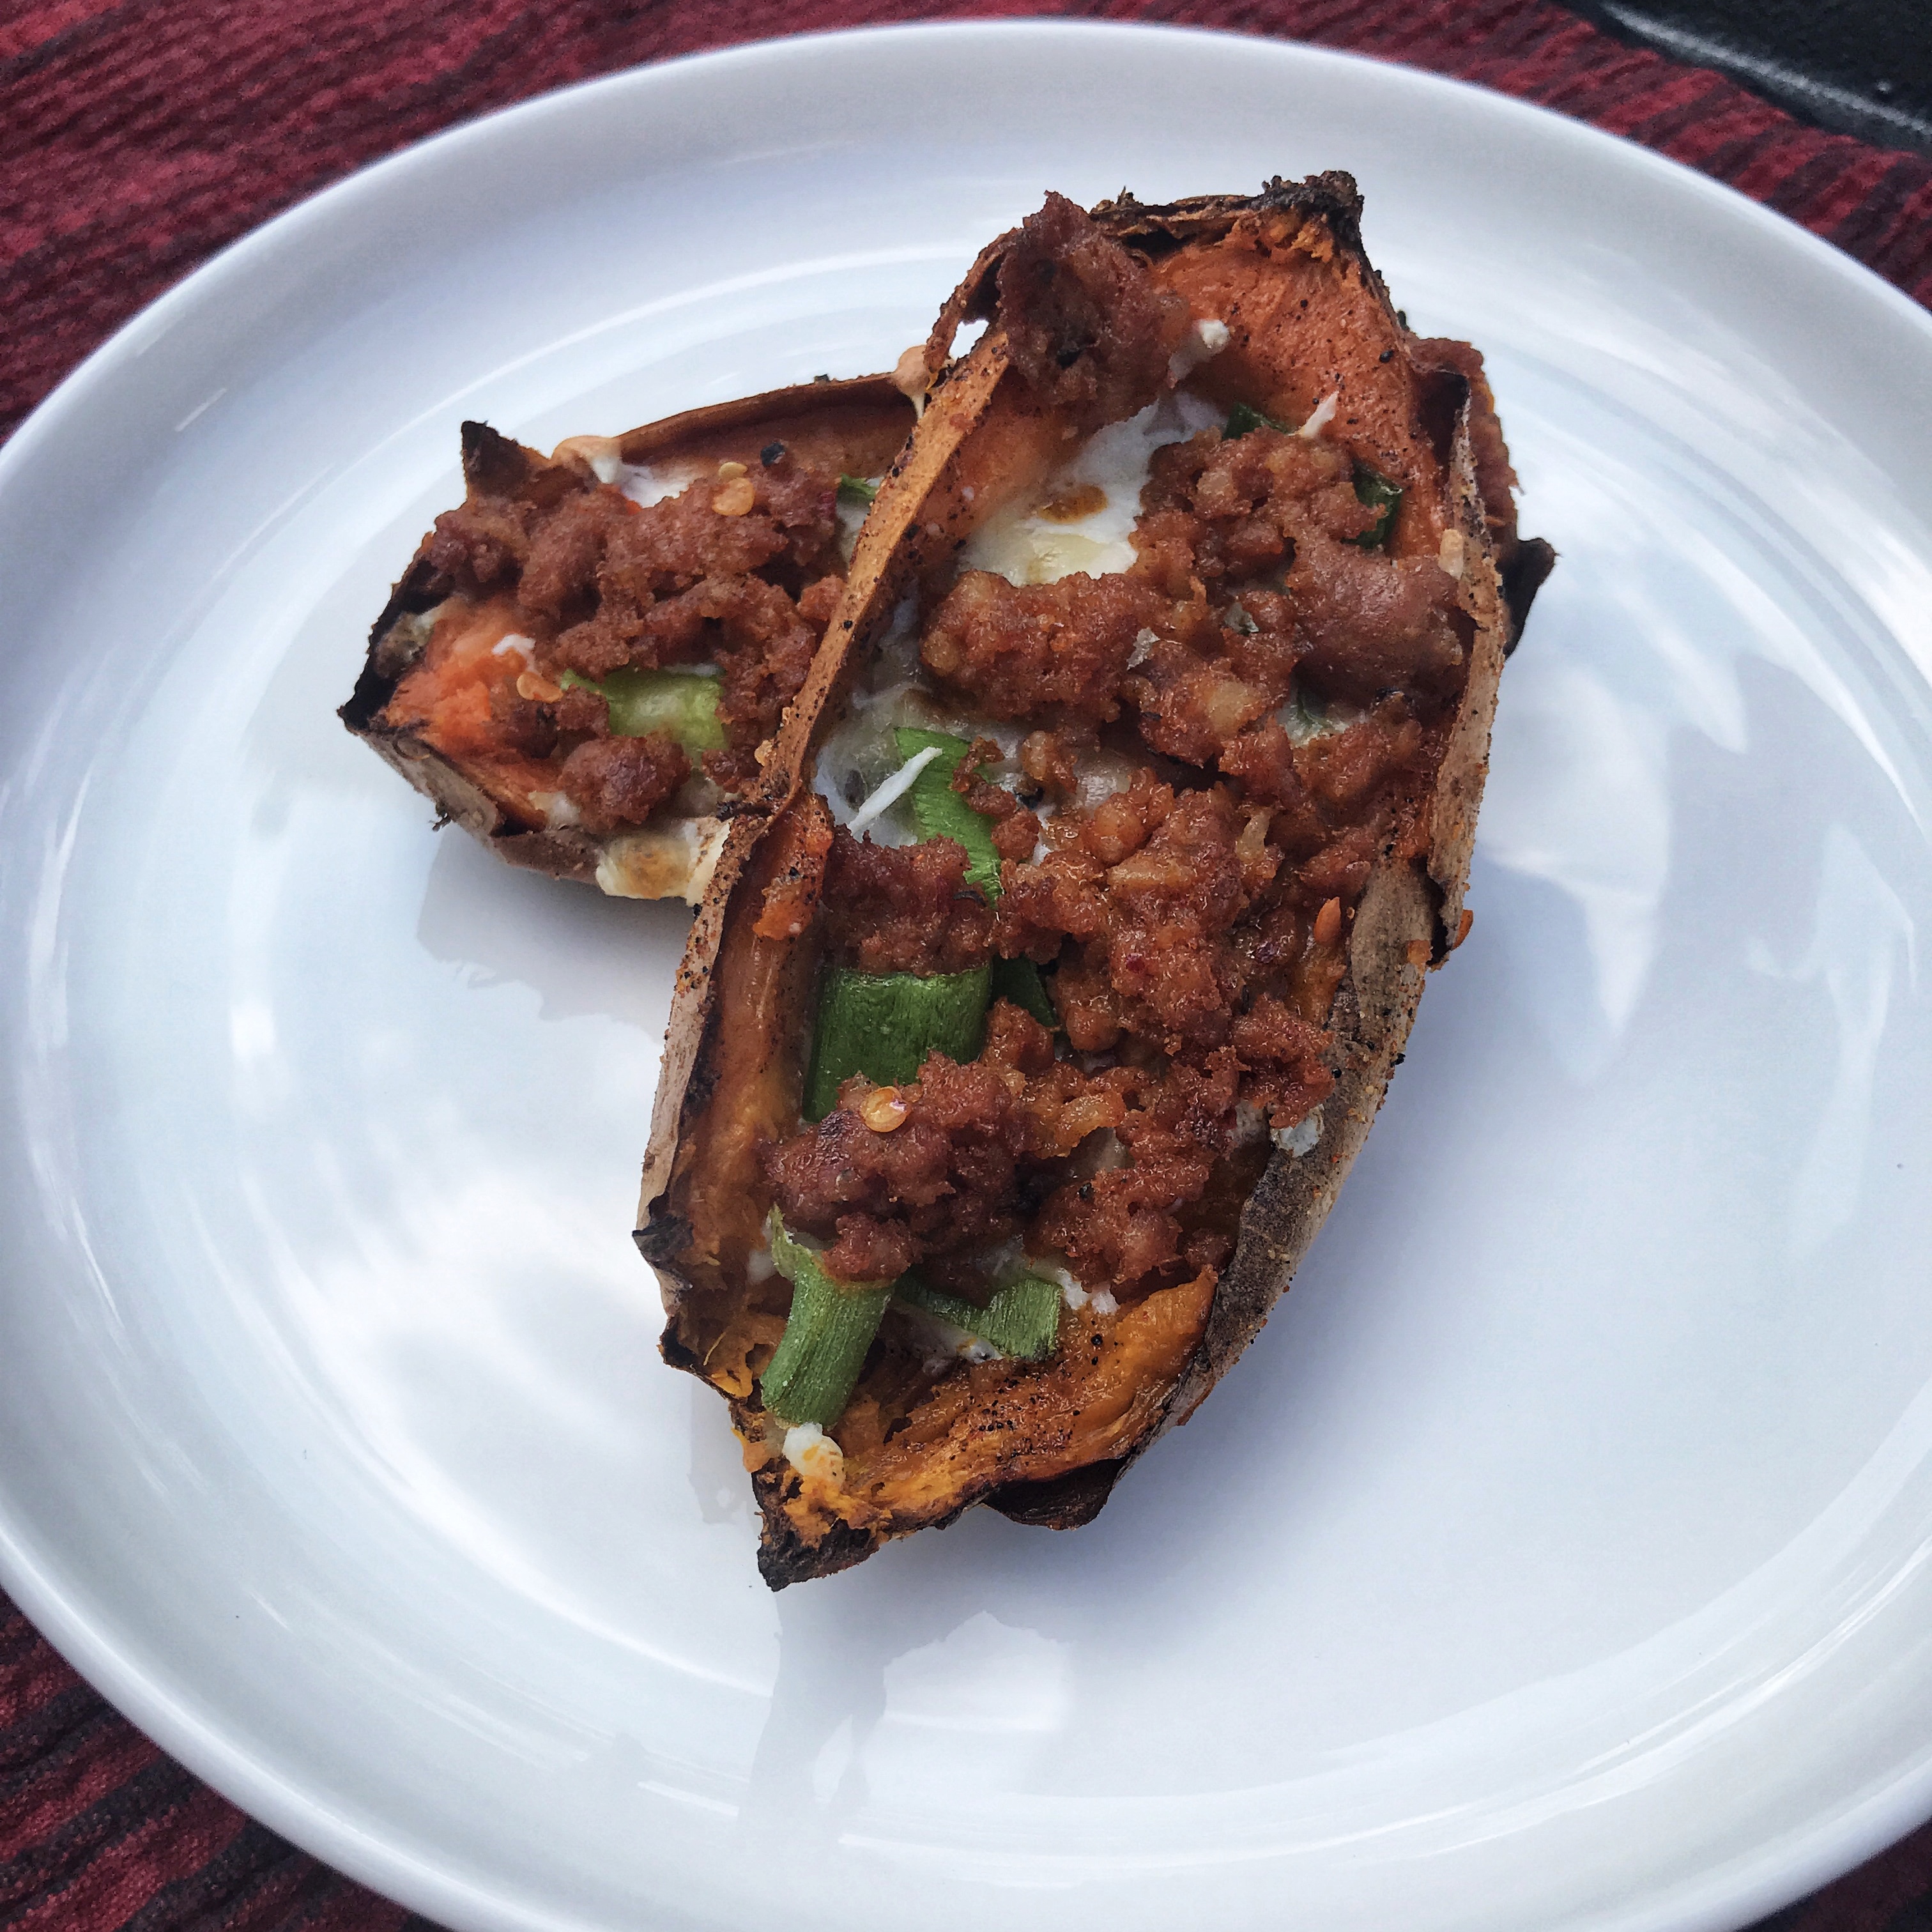 <p>Sweet potato skins are loaded with a spicy chorizo and cheese filling, baked crispy, and served with green salsa. You'll love the "sweet-heat combination." Beanie VanBuskirk says, "It's definitely a nice change from regular potato skins." </p>
                          